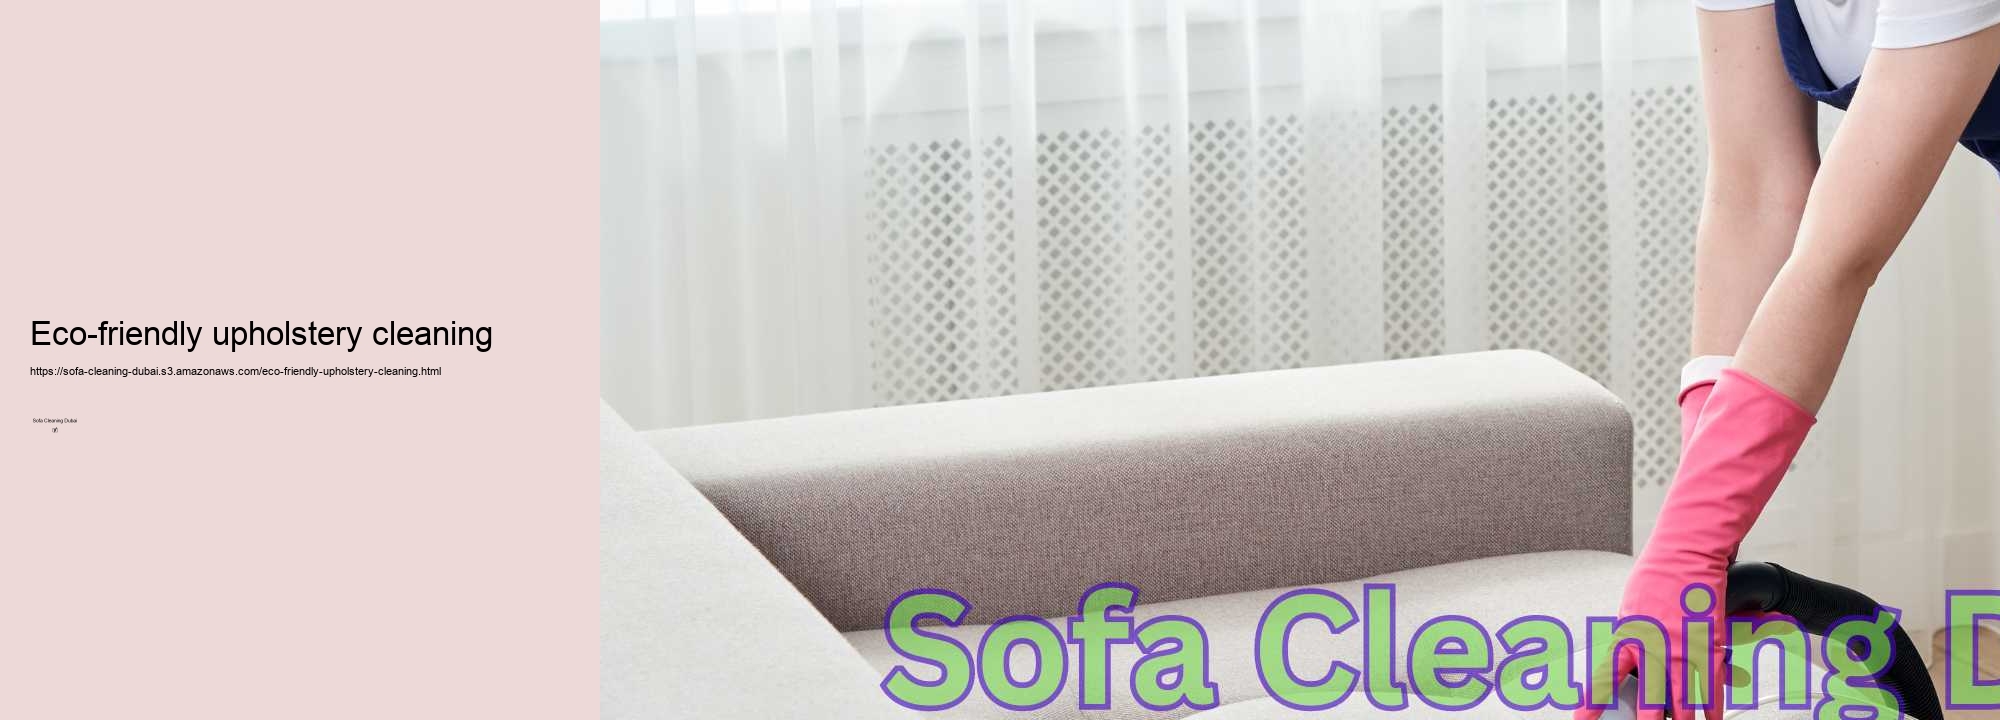 Eco-friendly upholstery cleaning